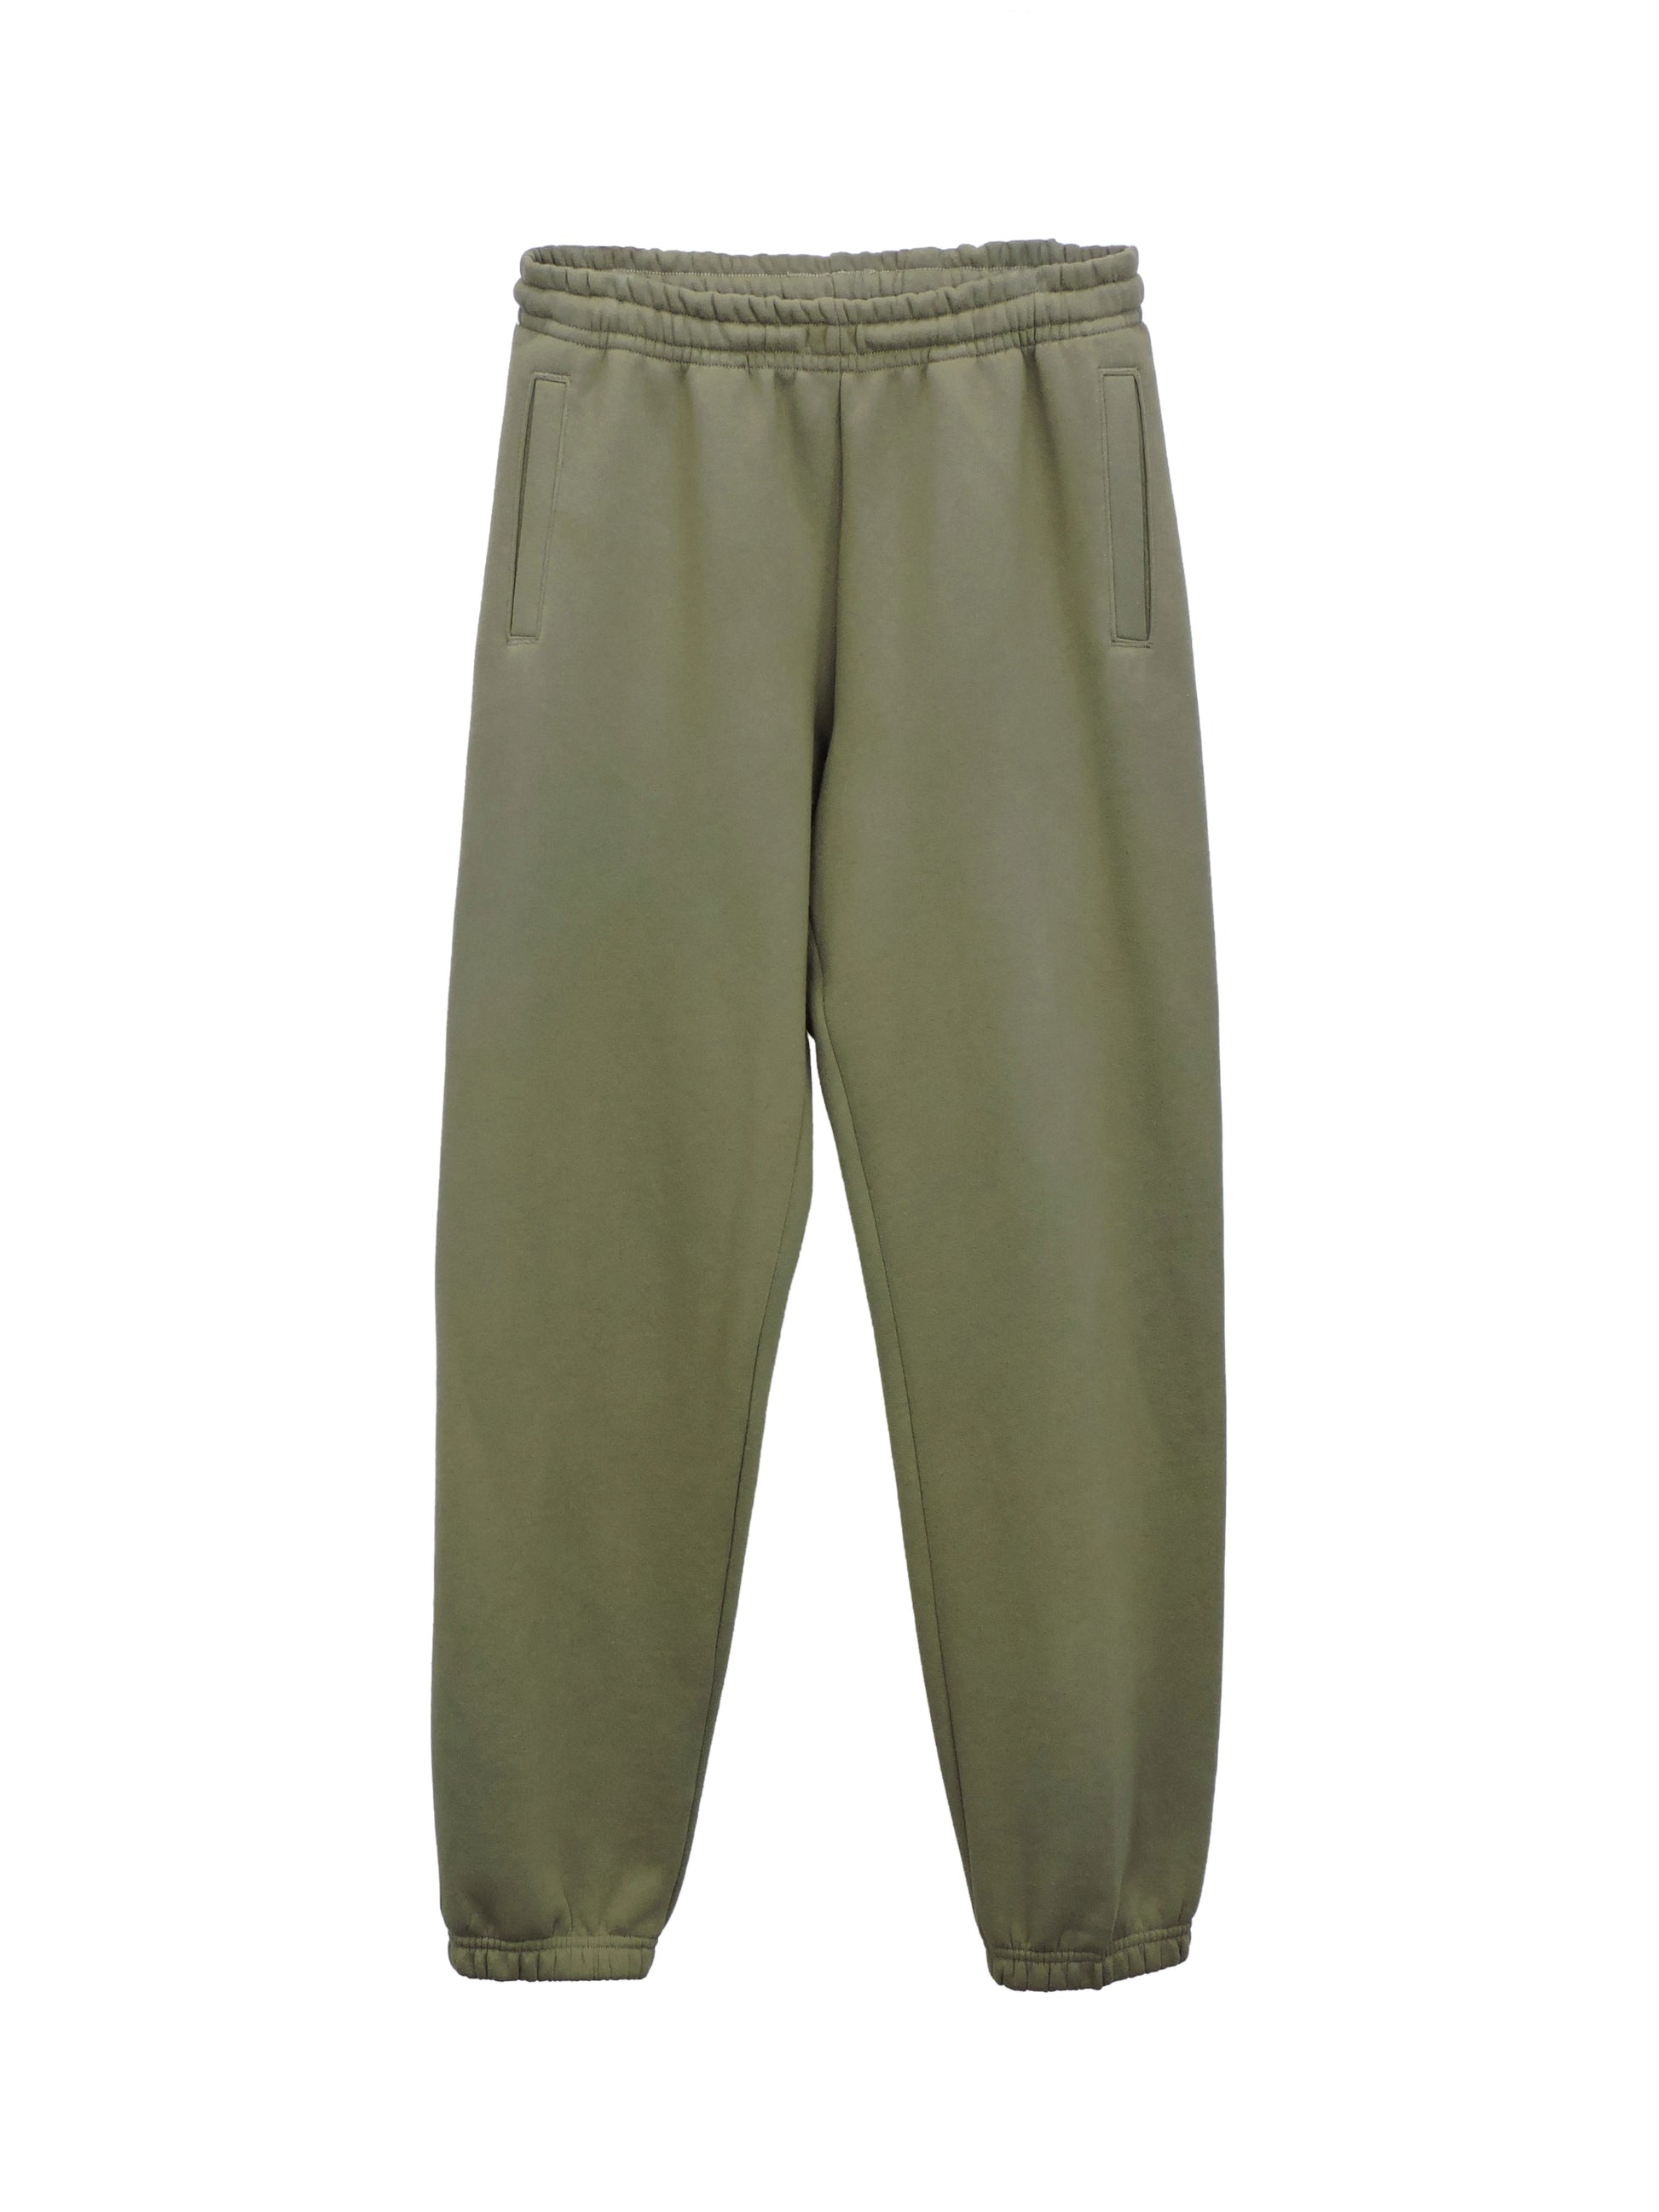 Moss green sweatpants with loose ankle cuffs and two side pockets